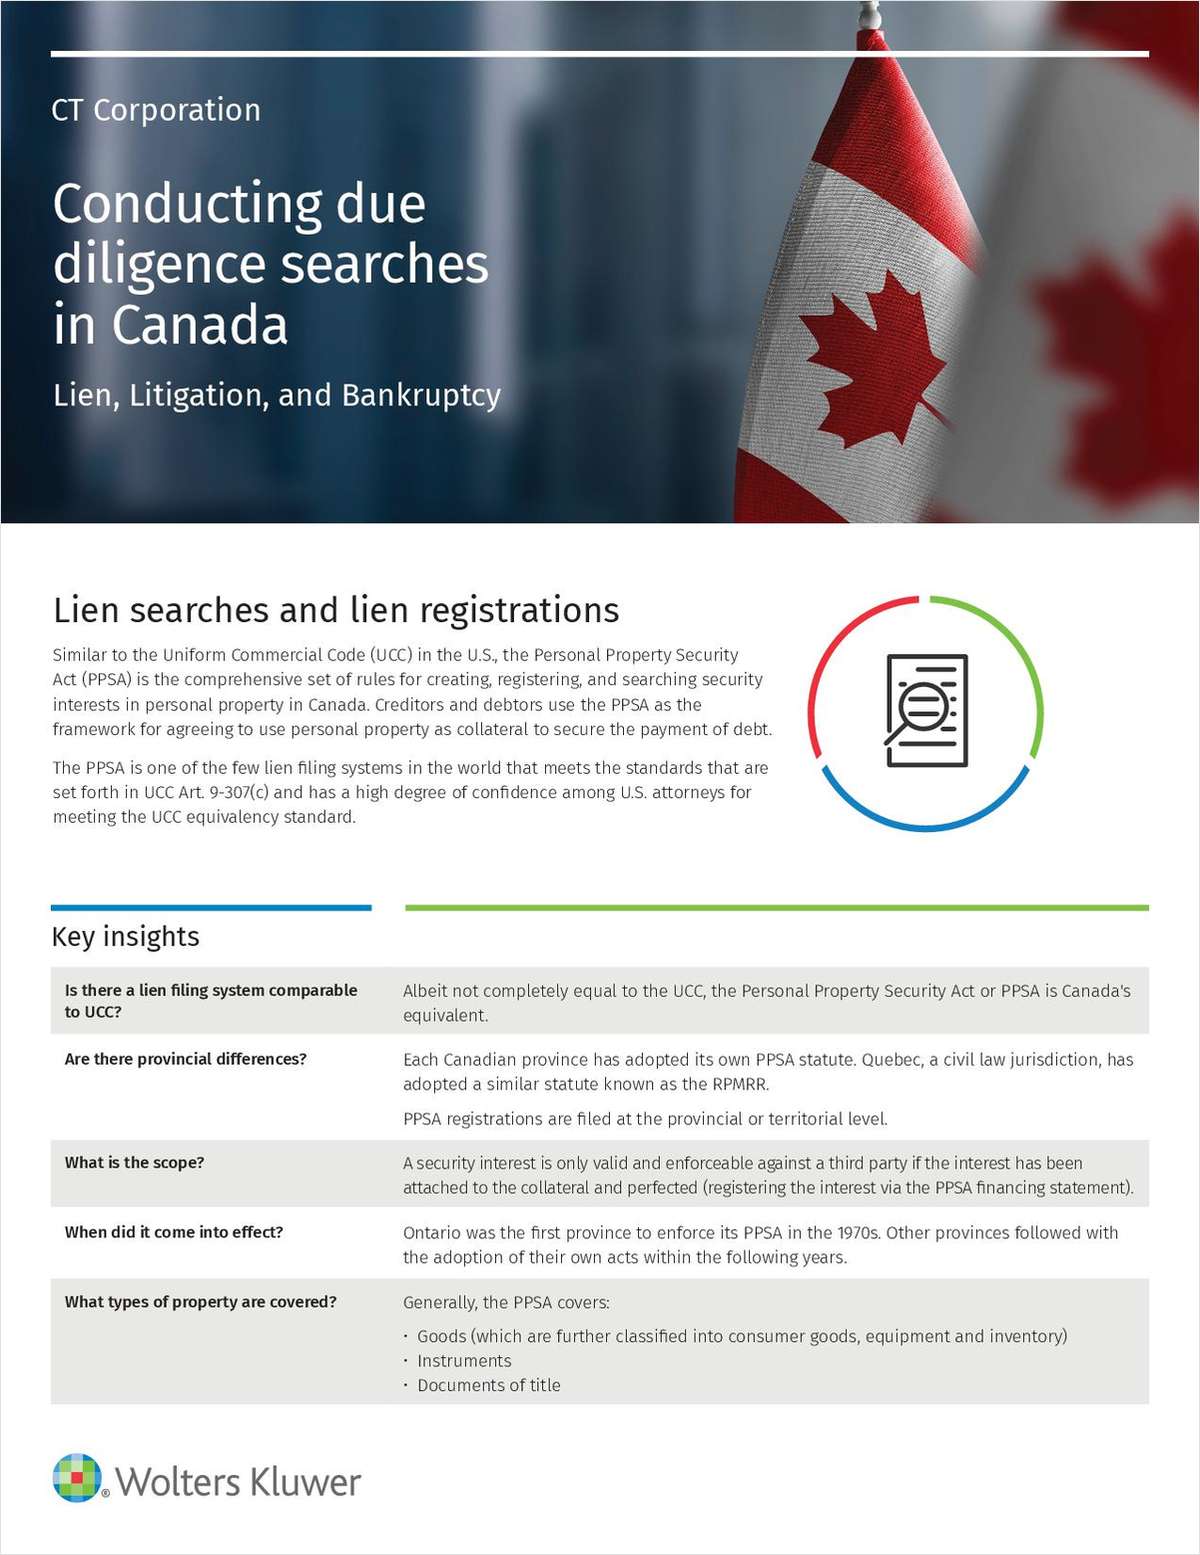 This guide provides quick answers to common questions about conducting due diligence searches in Canada, including a basic overview of Canada’s legal system, common terminology and more.